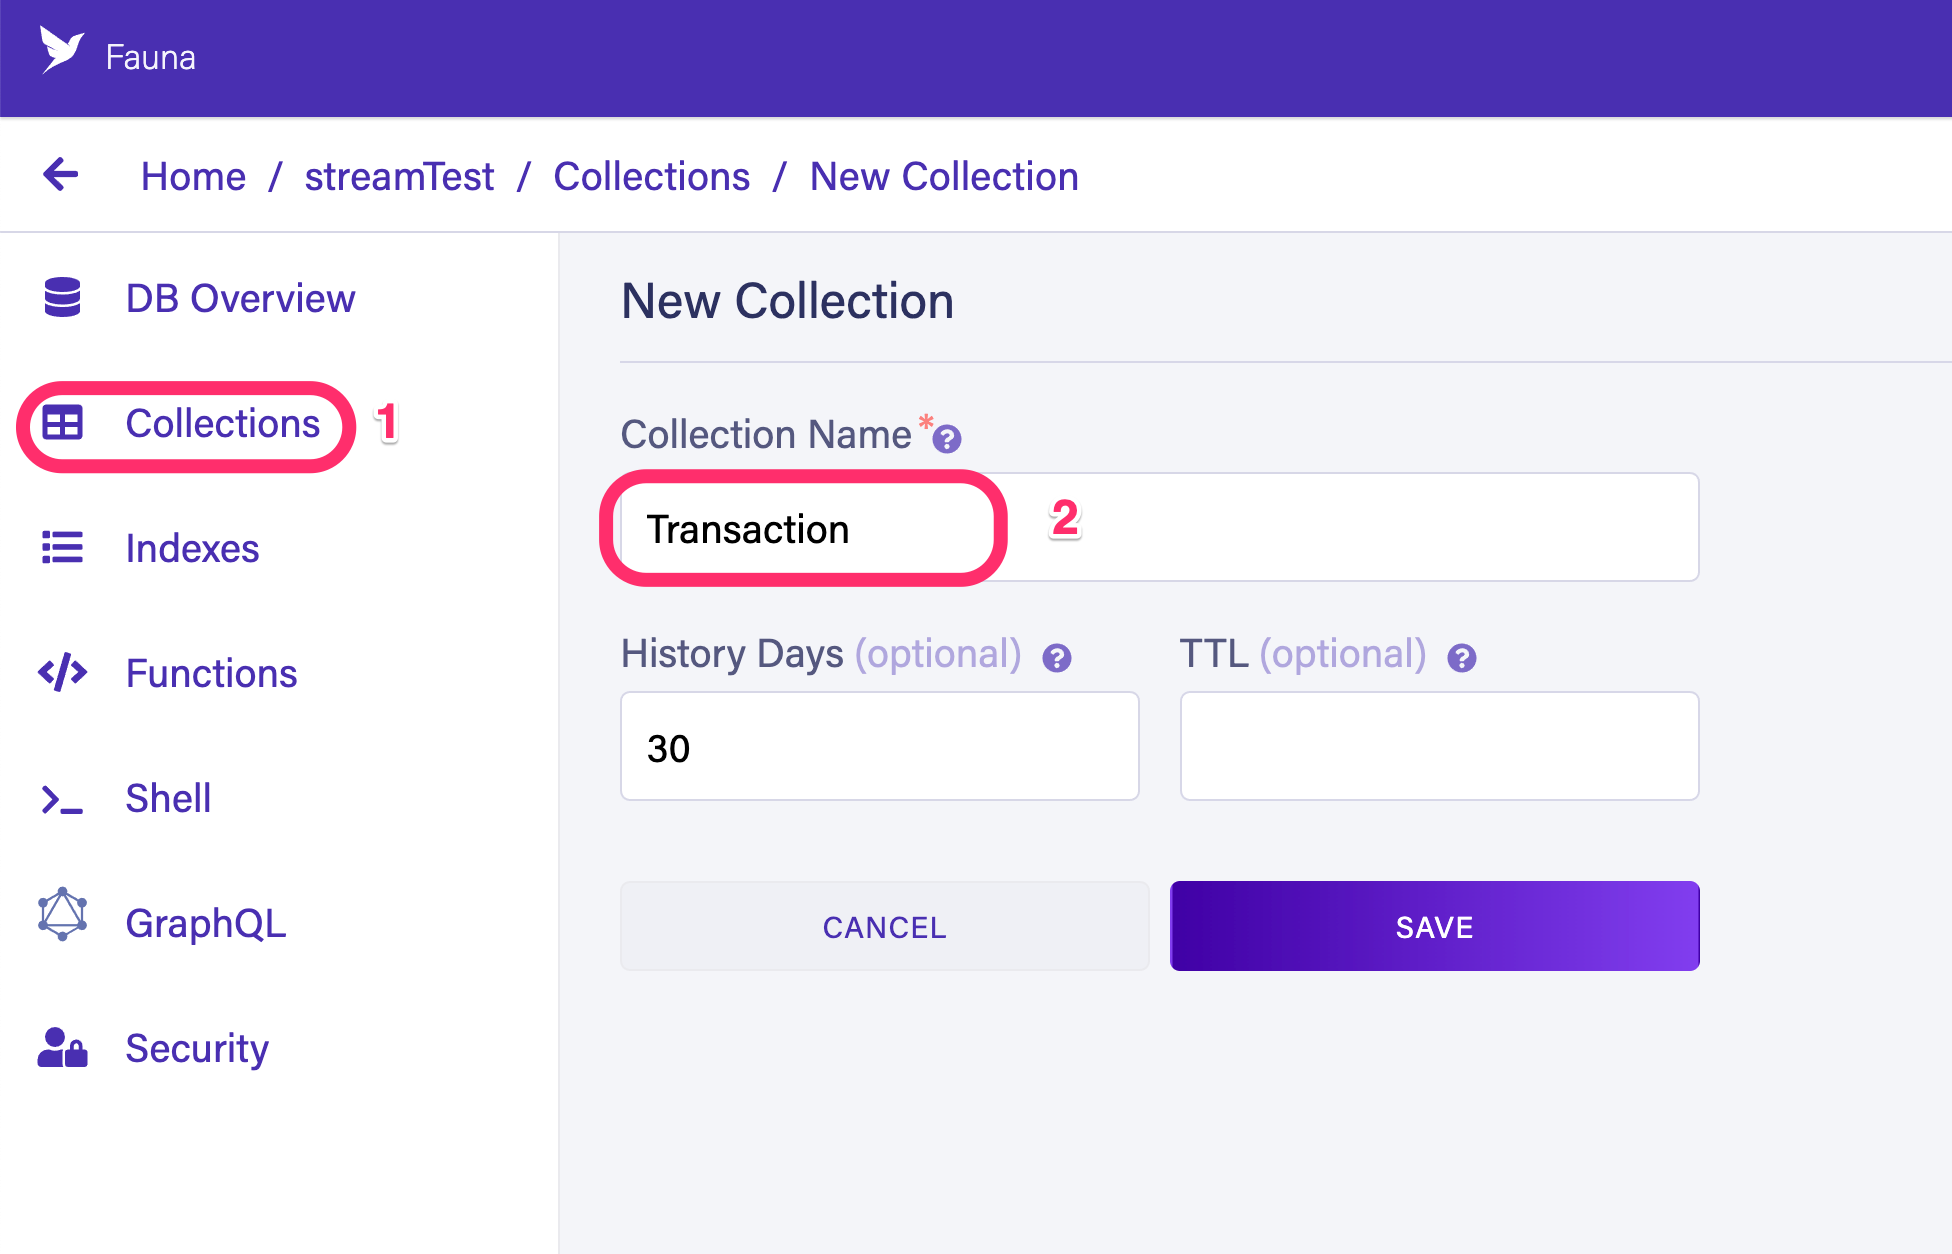 Collections: Collection Name